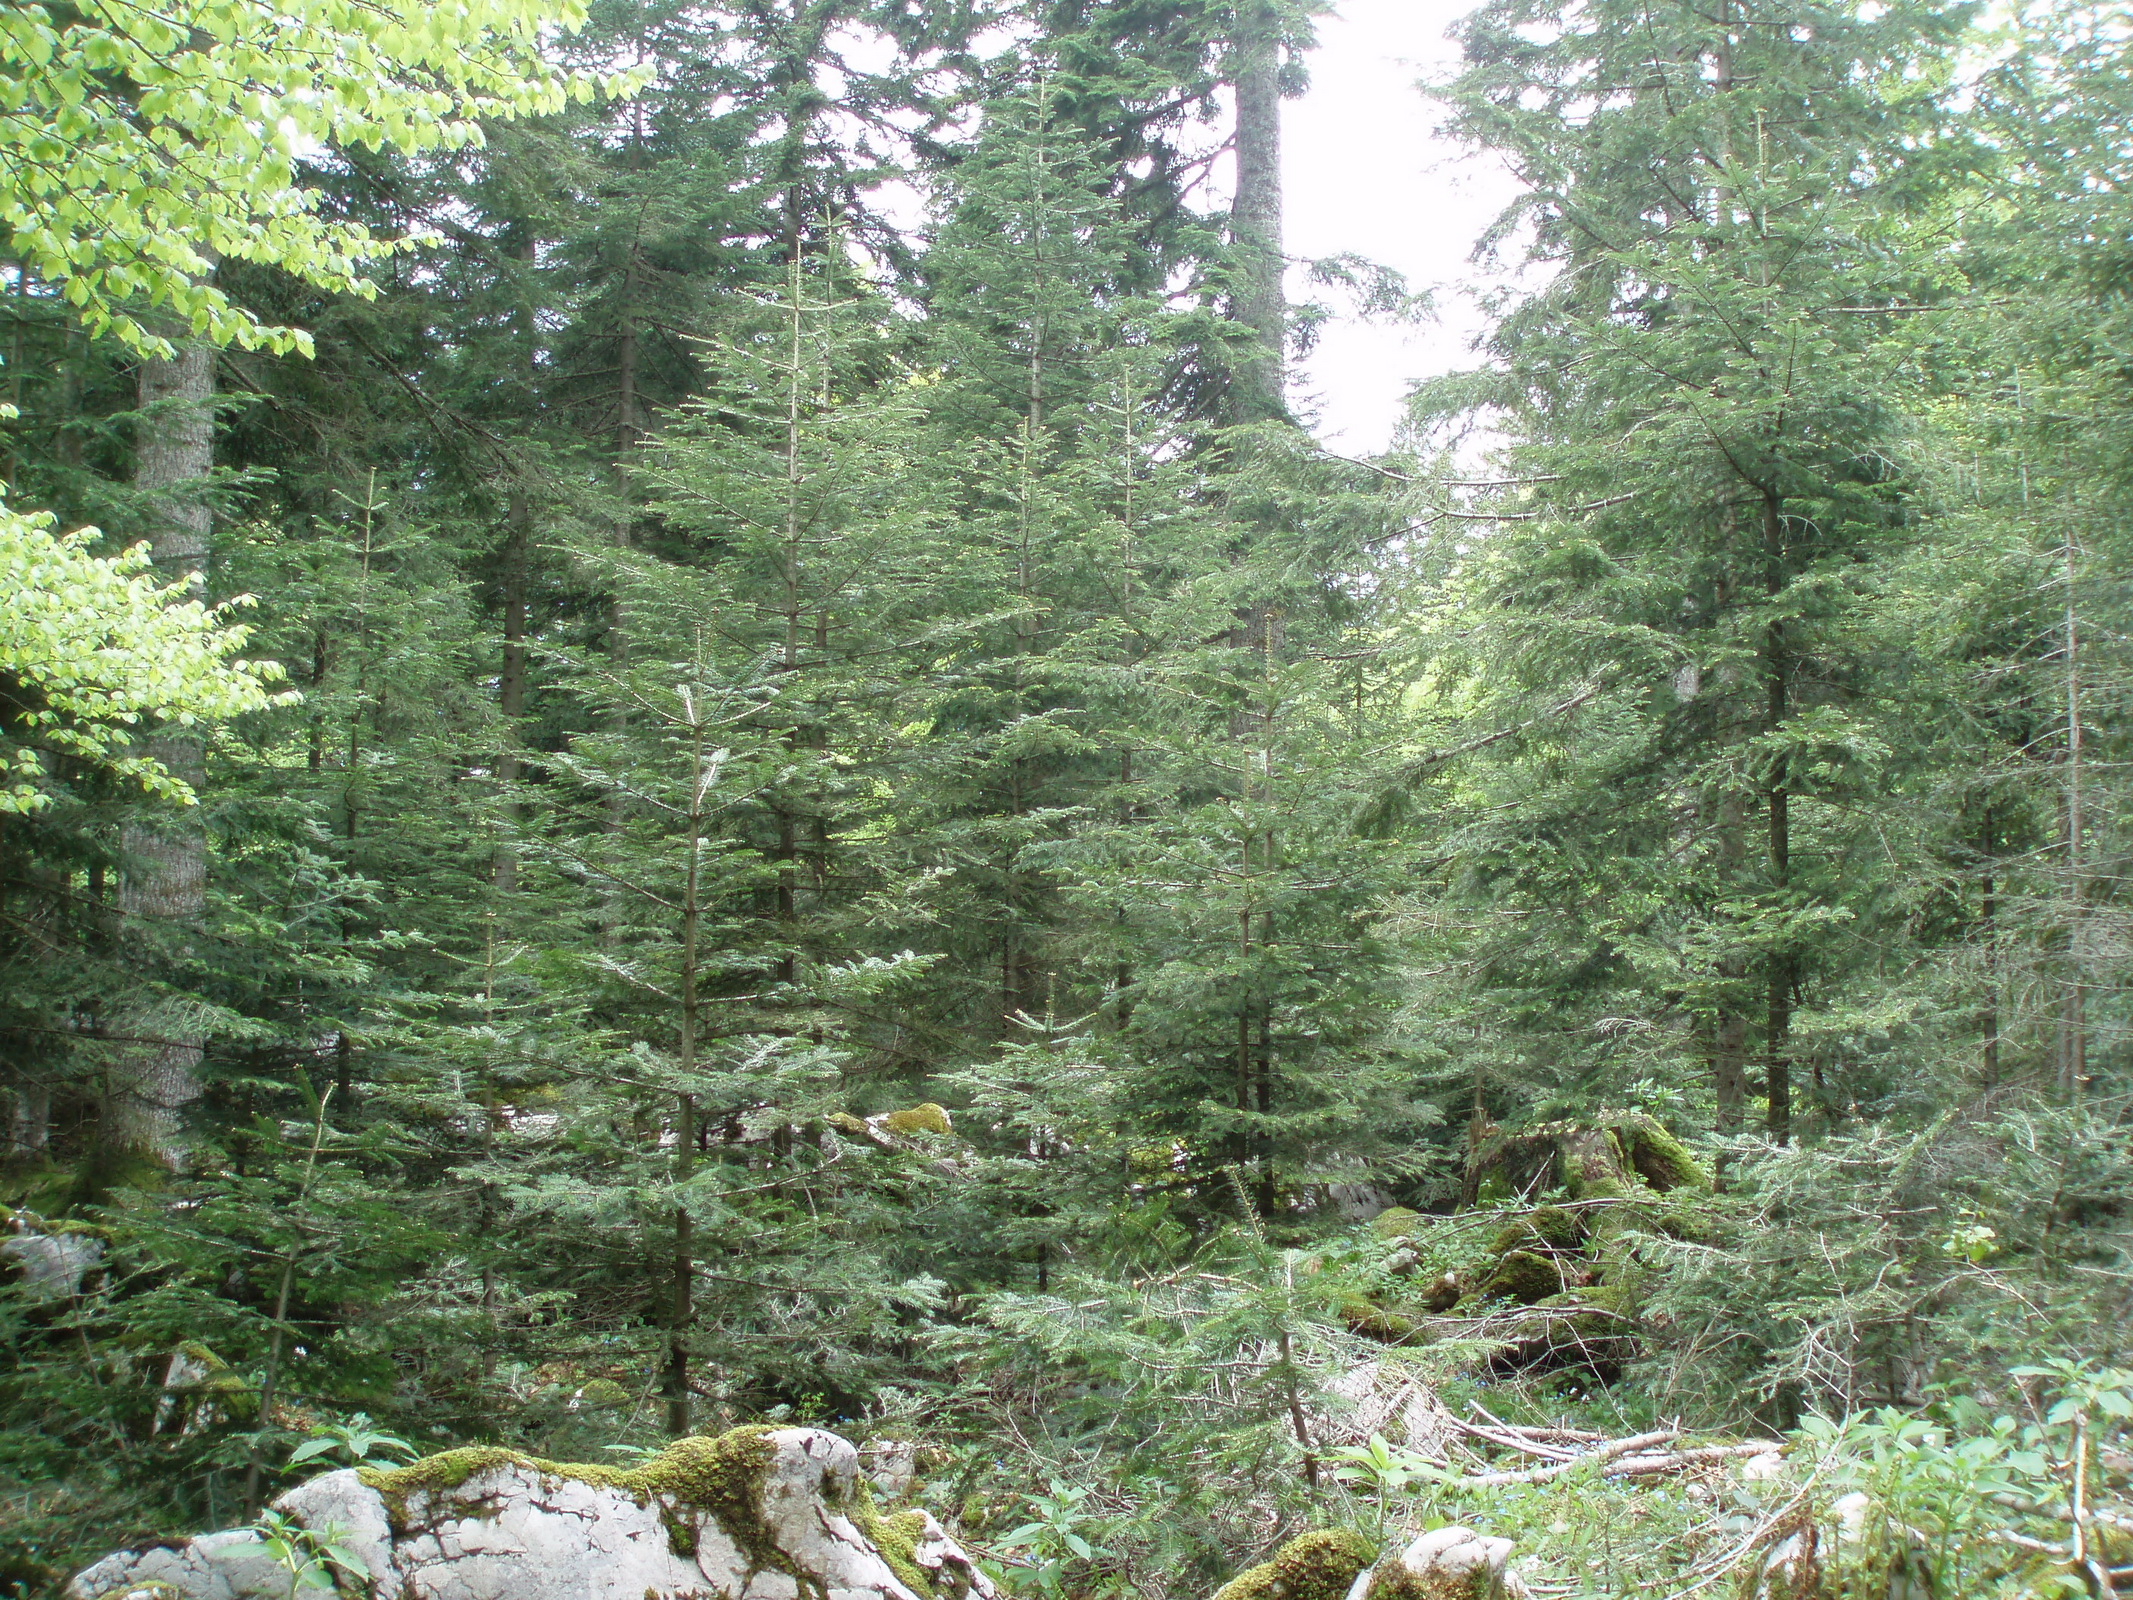 Region of Gorski kotar, Natural regeneration of Silver fir after single-tree selection cutting (C) Anic